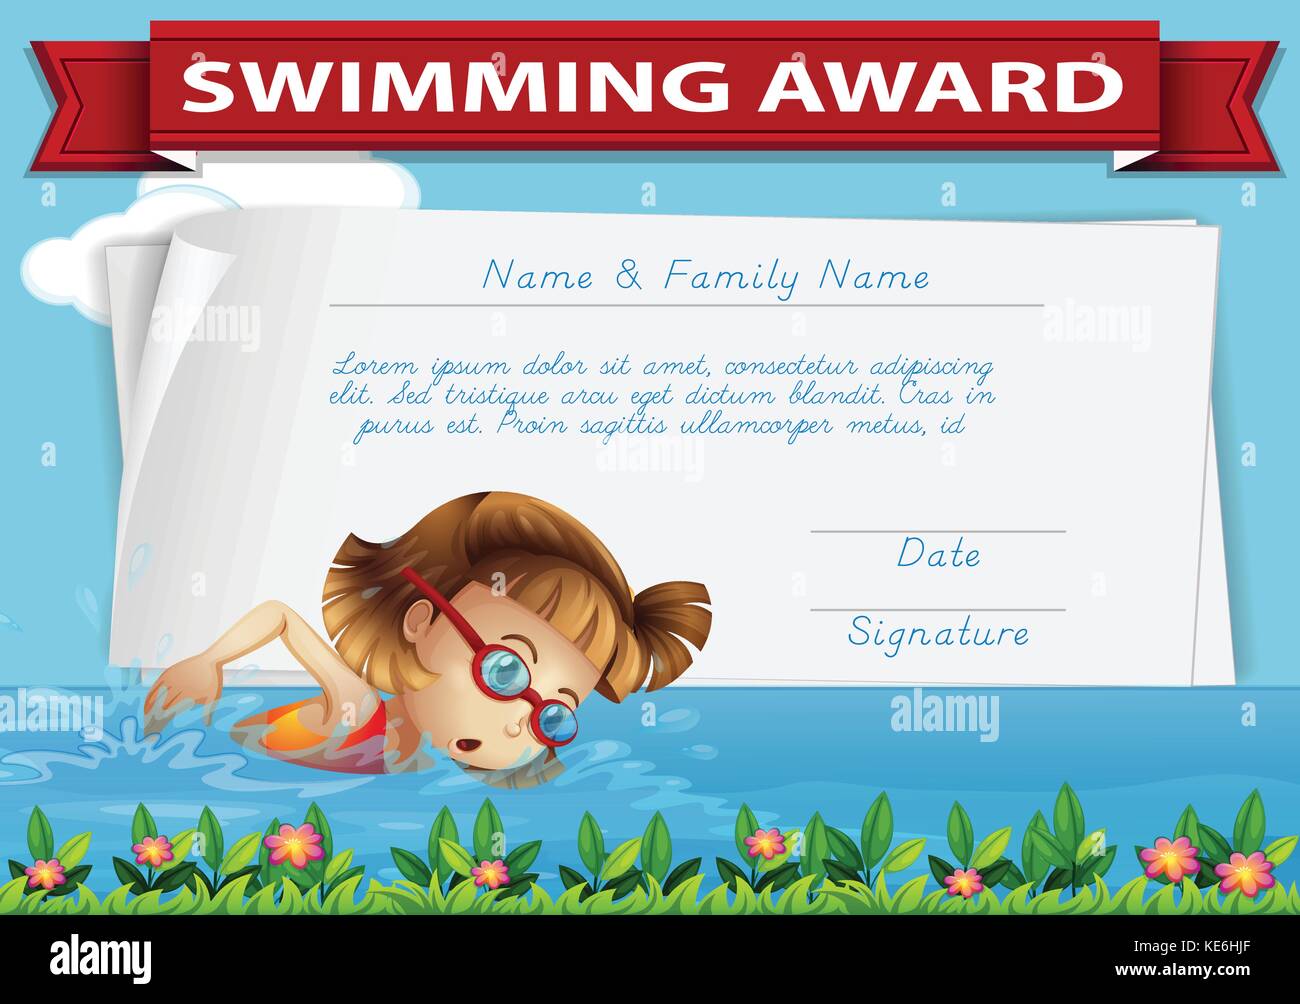 Swimming Certificate High Resolution Stock Photography and Images With Regard To Life Saving Award Certificate Template